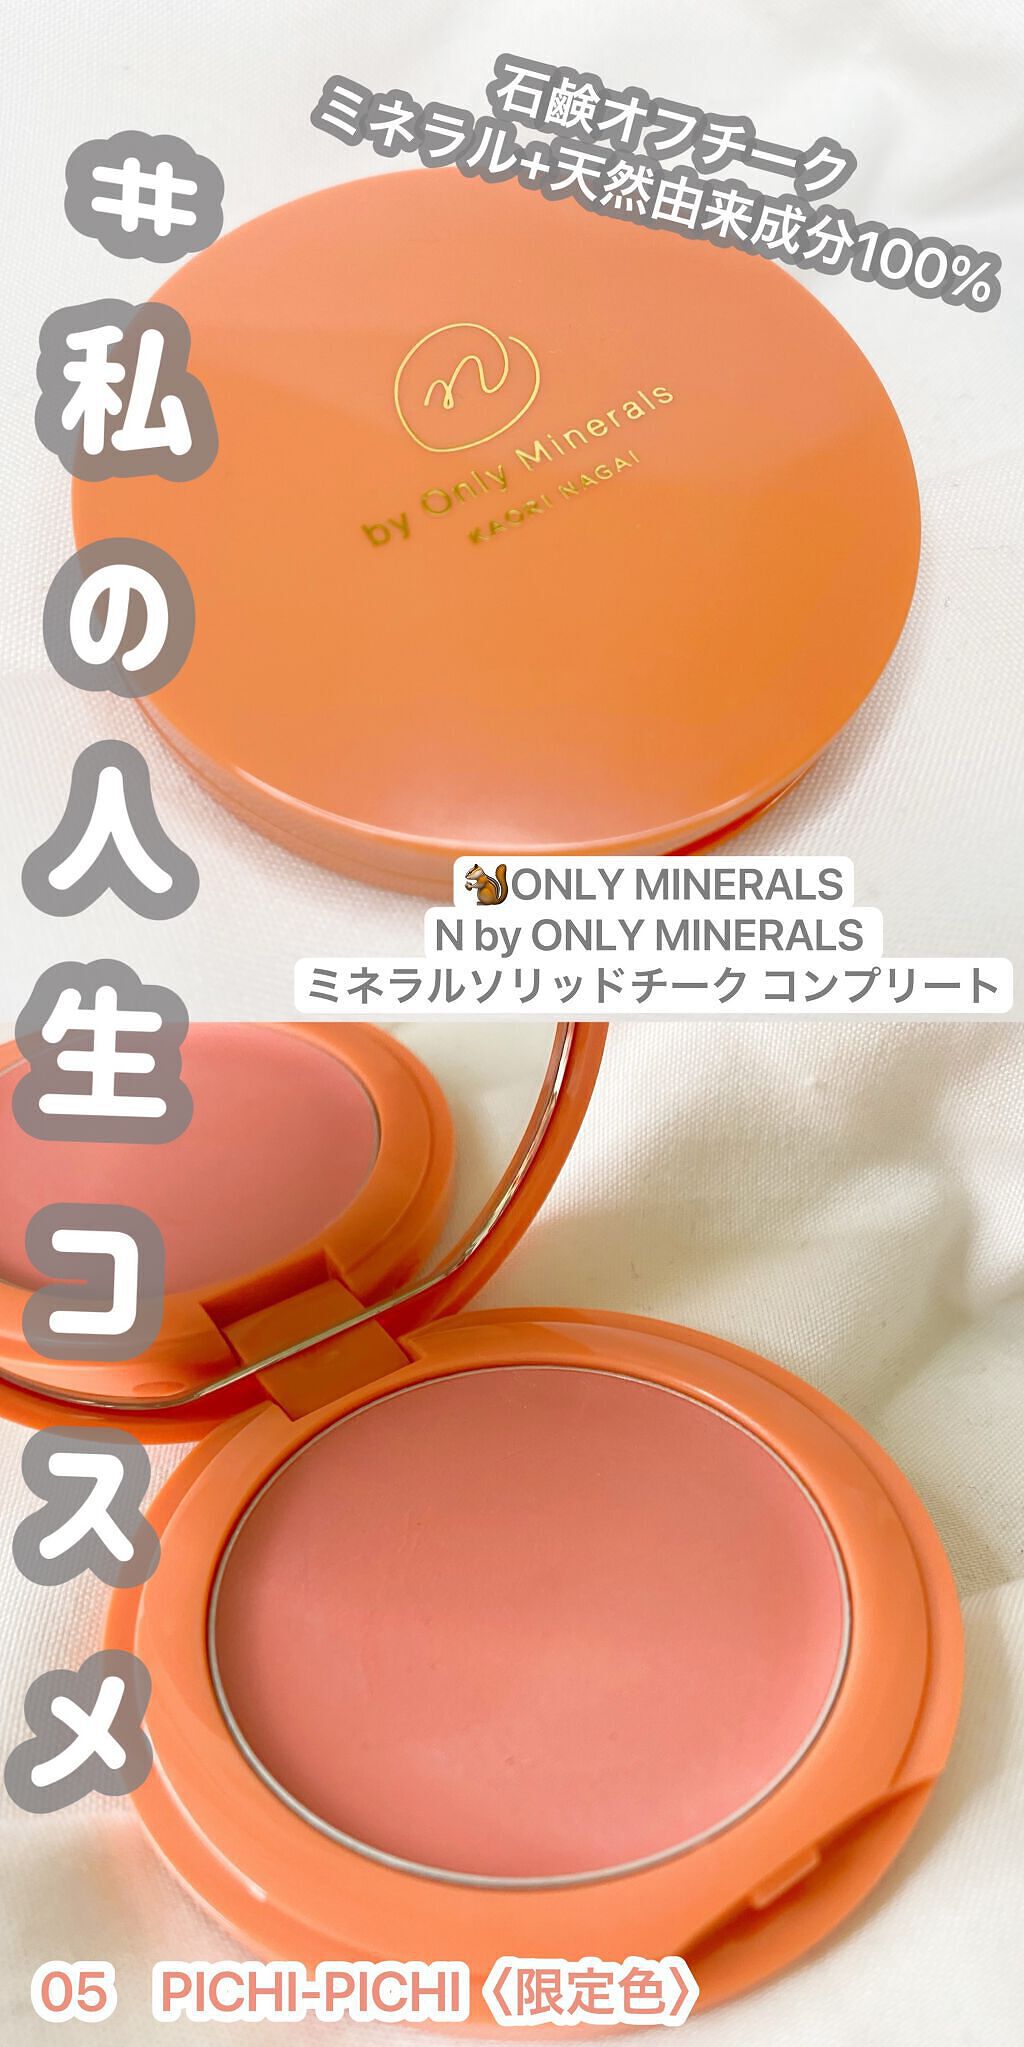 N by ONLY MINERALS ミネラルソリッドチーク コンプリート/ONLY MINERALS/ジェル・クリームチークの動画クチコミ1つ目